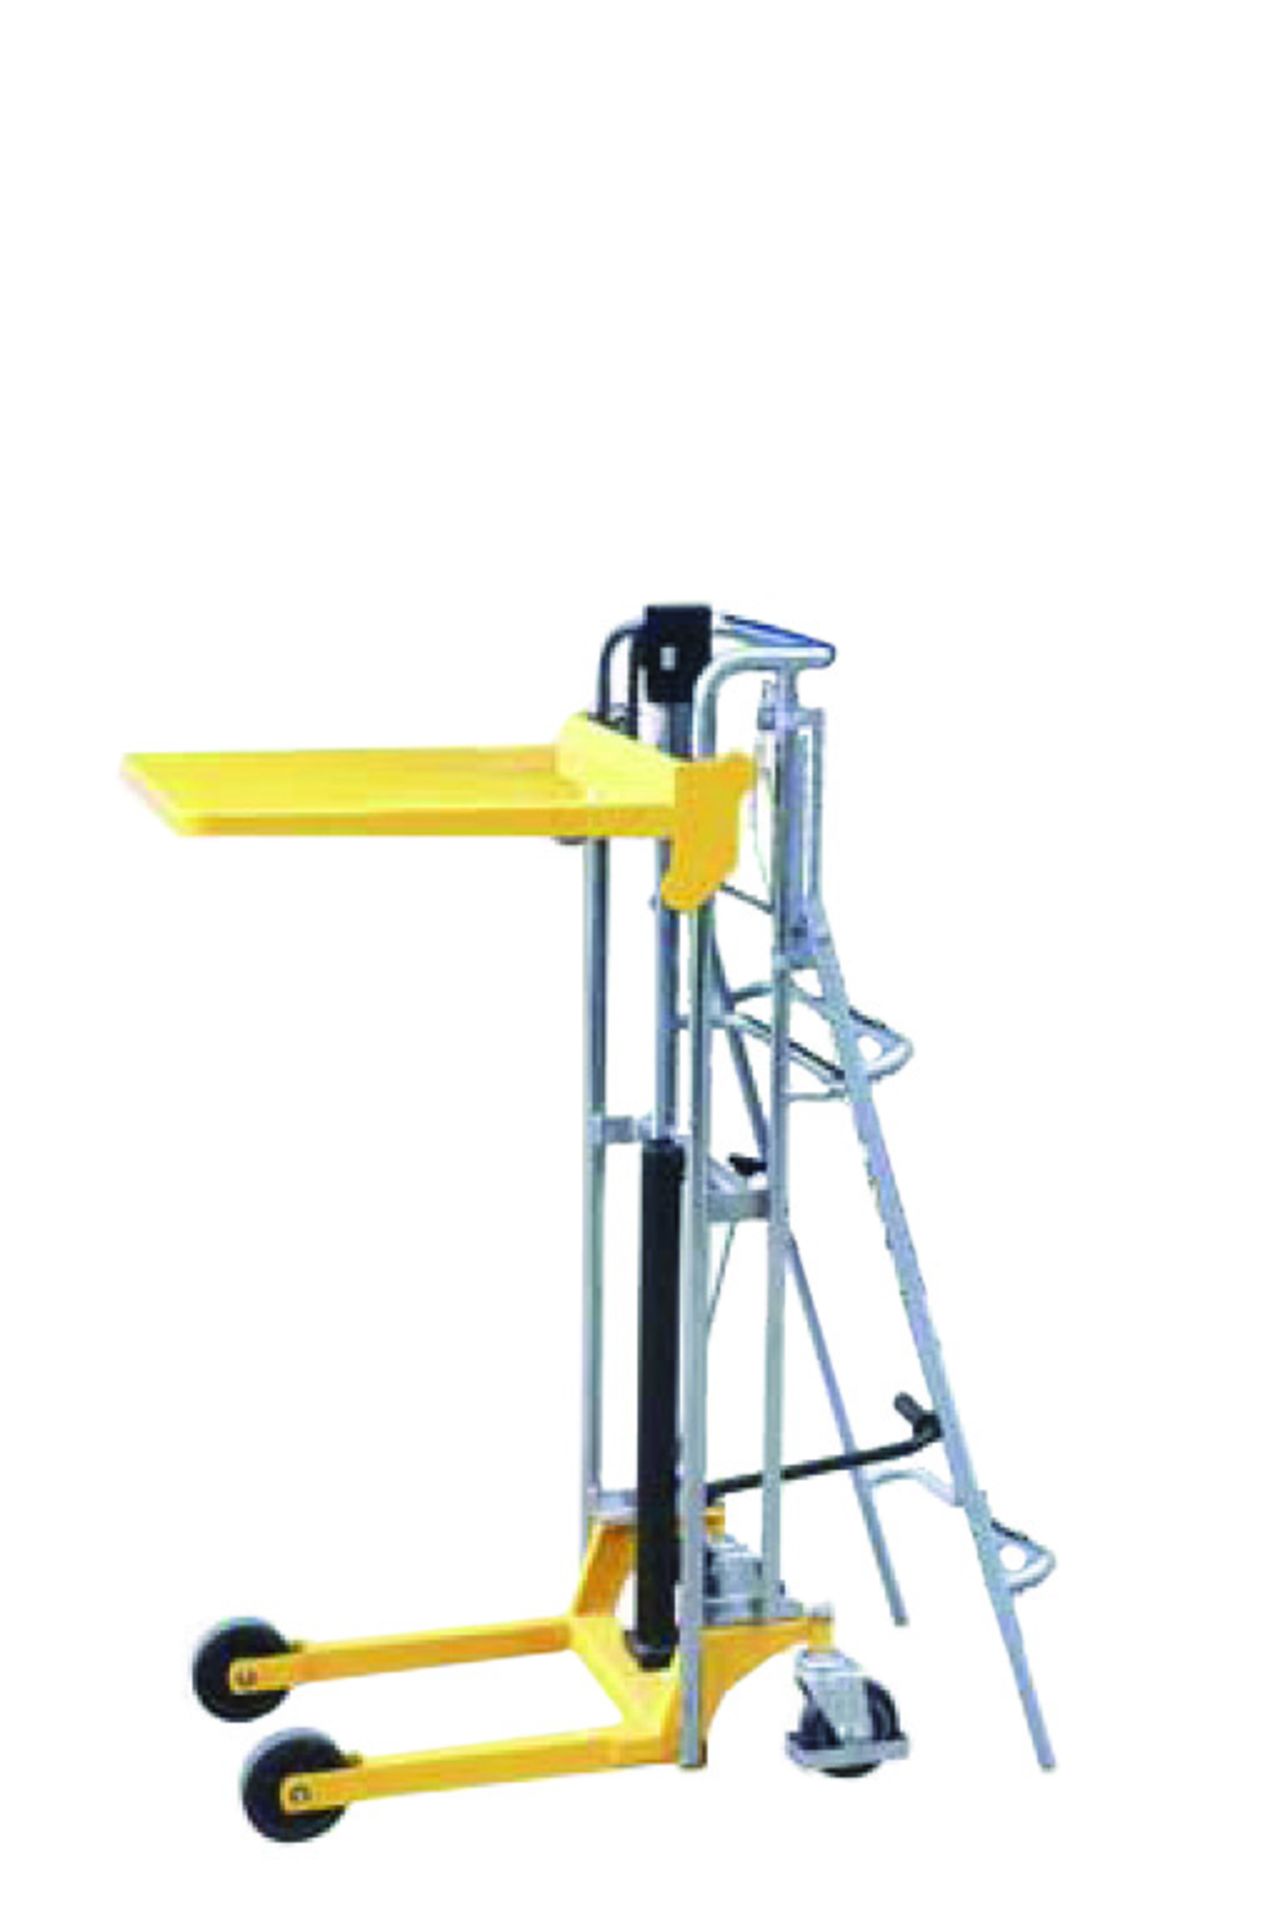 1 X 400KG X 850MM HEIGHT PLATFORM STACKER - BRAND NEW
Simple and easy operation
 Lifting movement